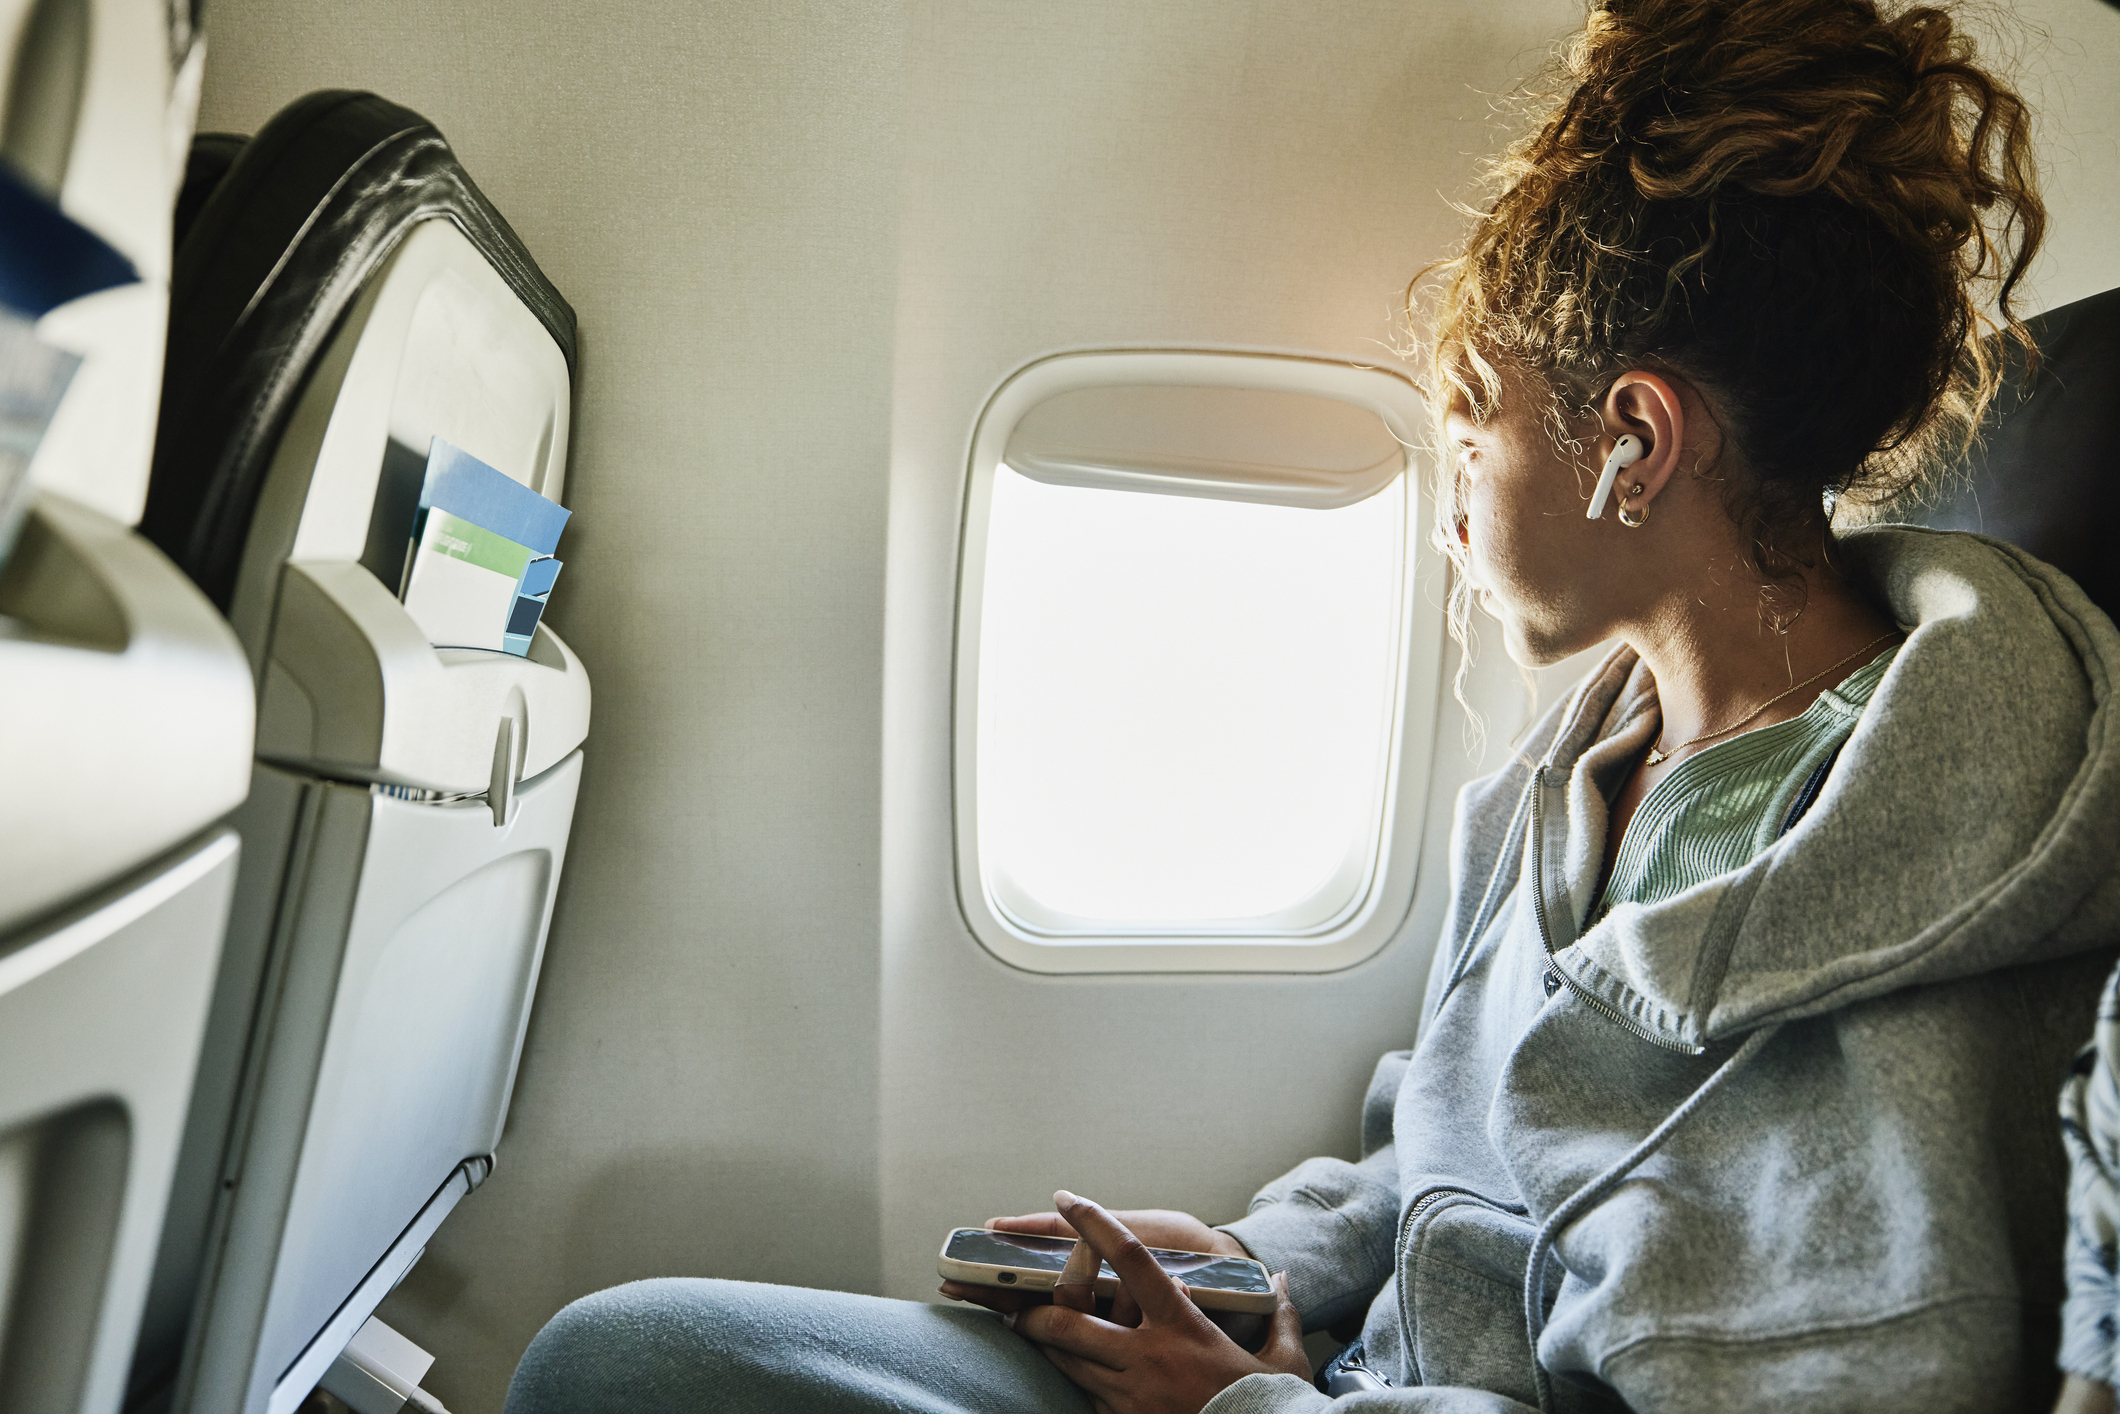 Person with headphones looking out an airplane window, holding a phone, with a seatback visible